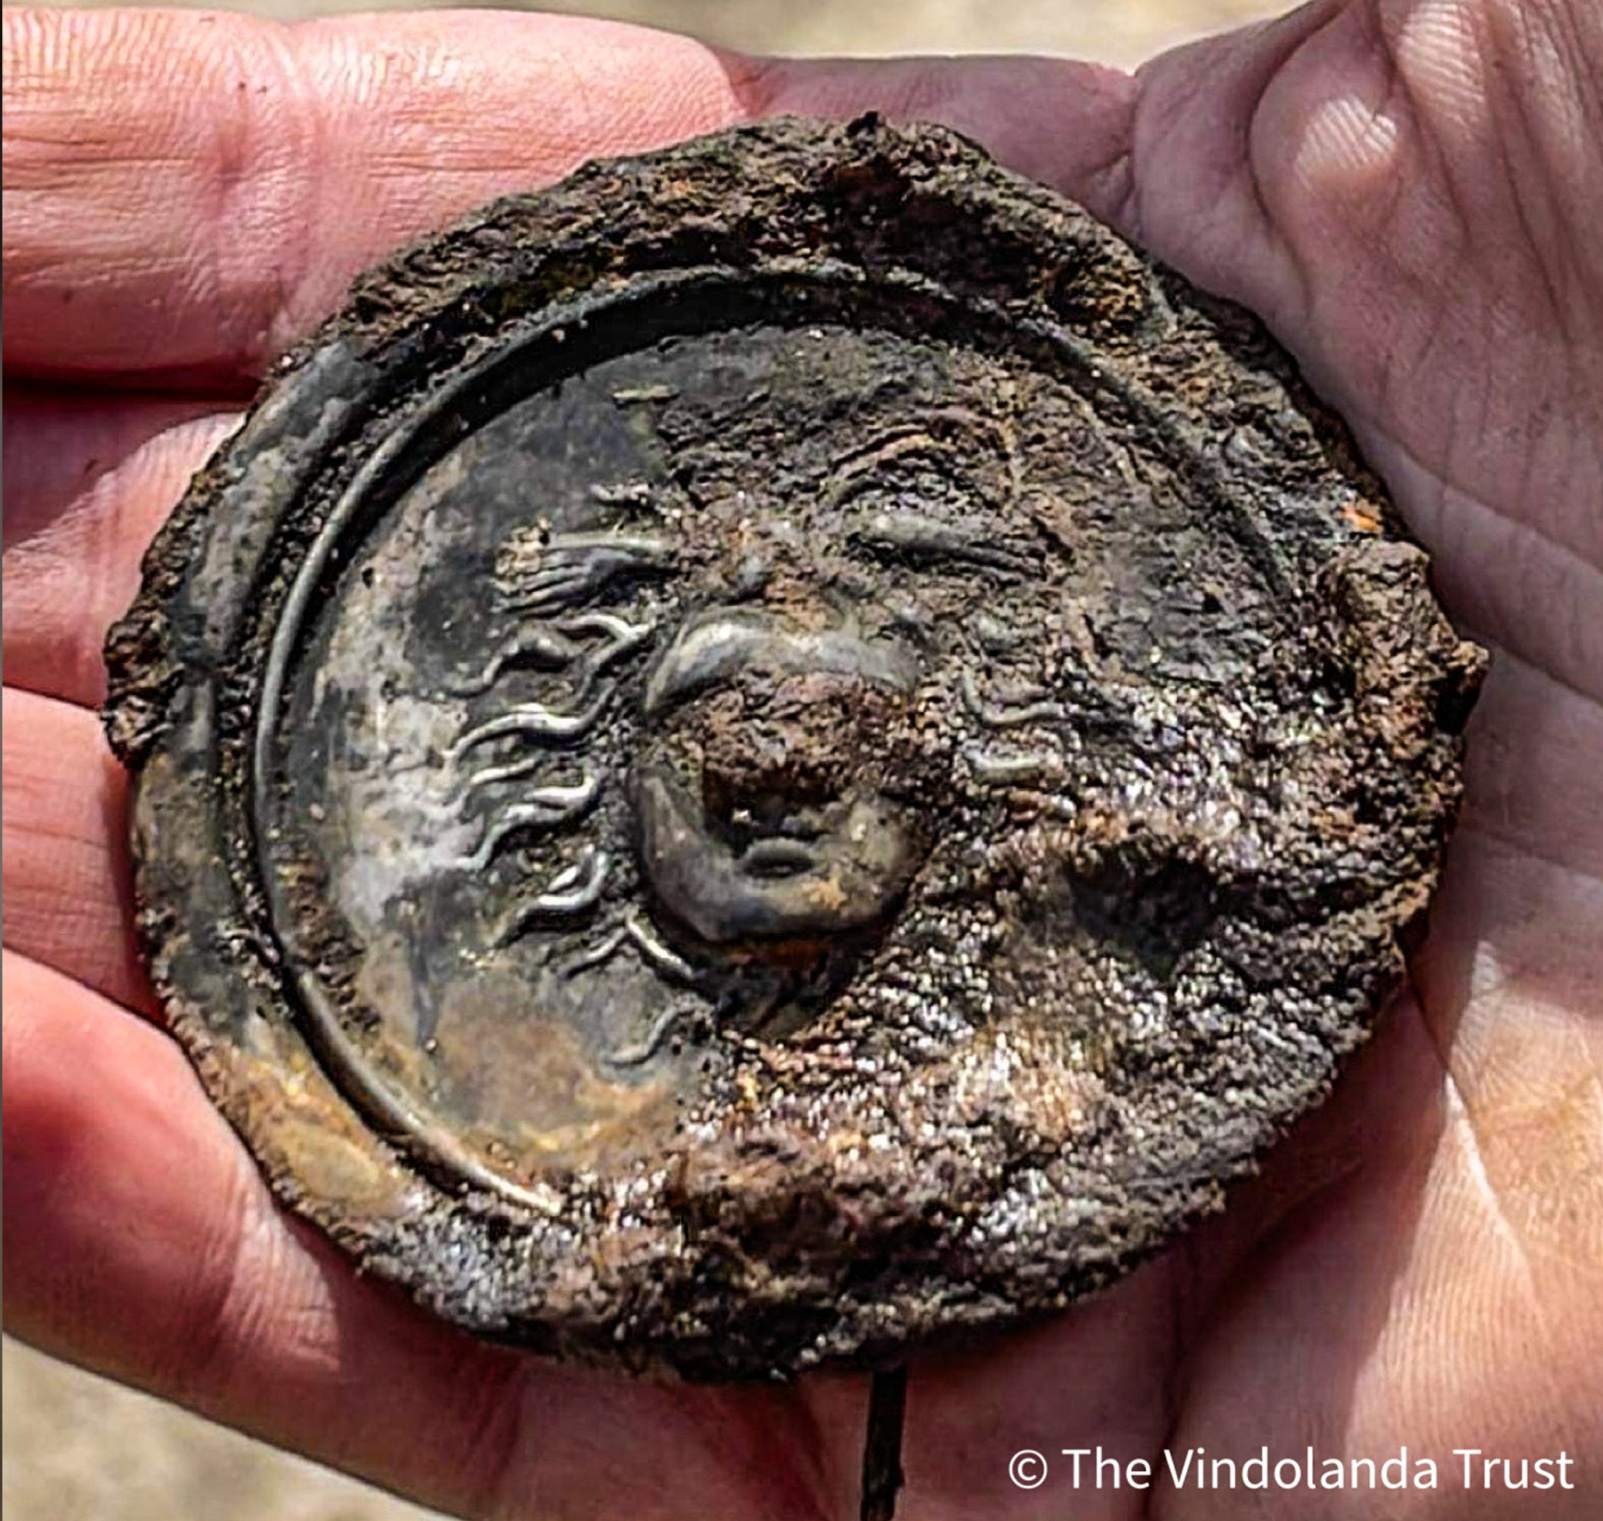 The hand-size Medusa medal dates to the Hadrianic period at Vindolanda, a Roman auxiliary fort in England.